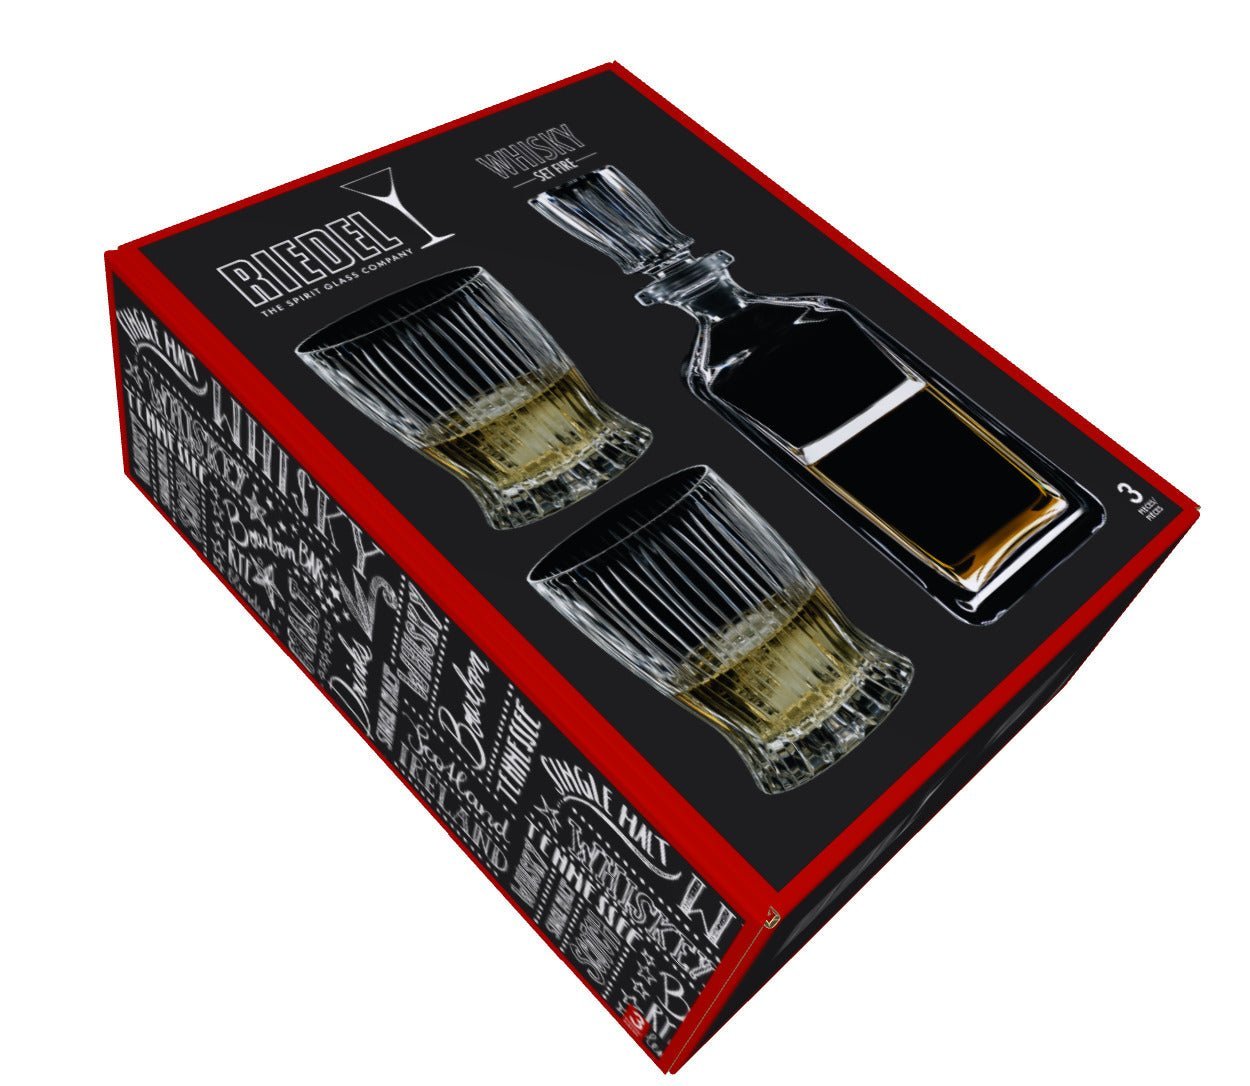 RIEDEL Fire Tumbler Collection 3- Piece Whisky Set